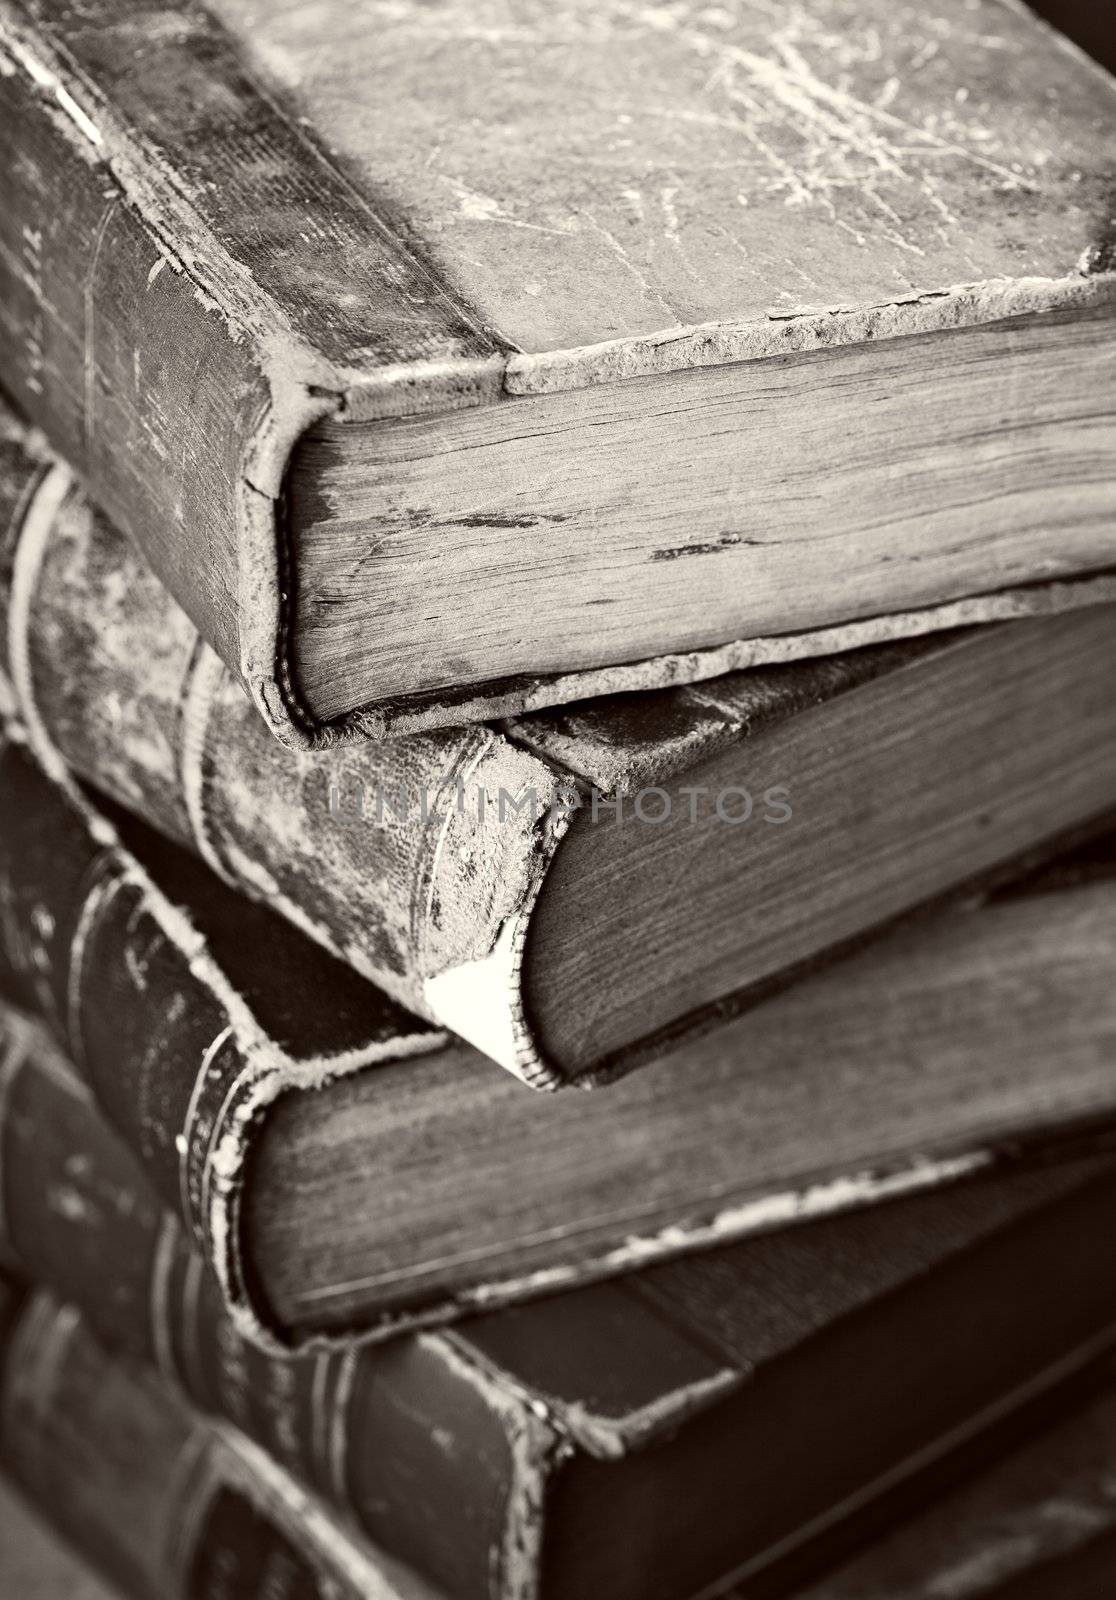 Sepia toned image of a stack of old worn books.